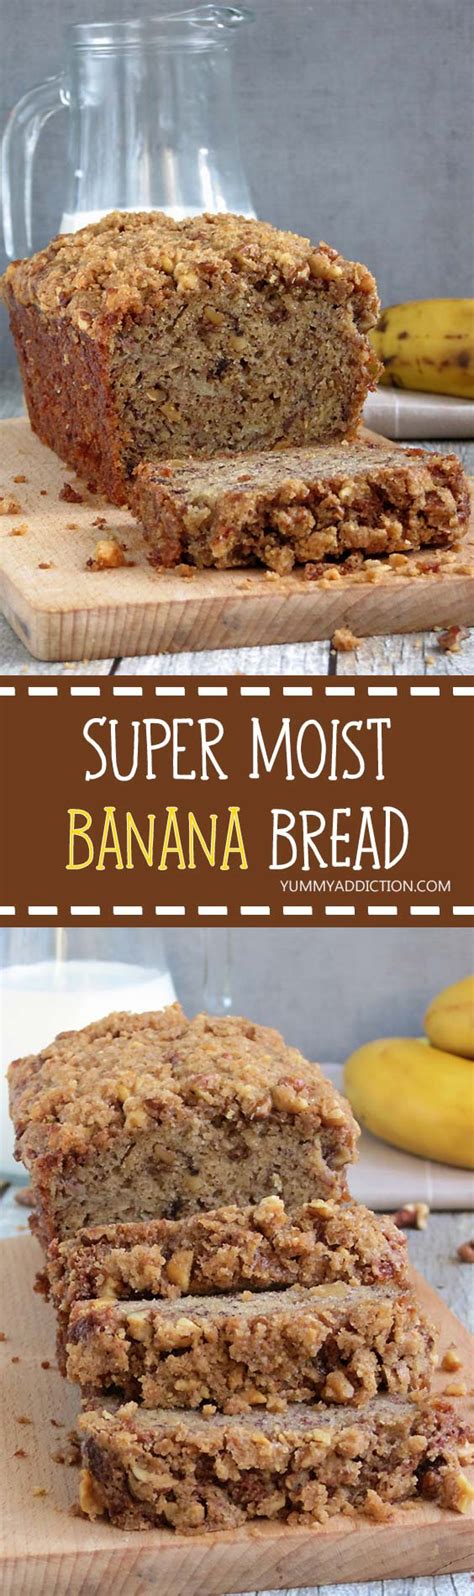 The beauty of this banana bread recipe is you don't need a fancy mixer! Moist Banana Bread - w/ Crunchy Streusel Topping